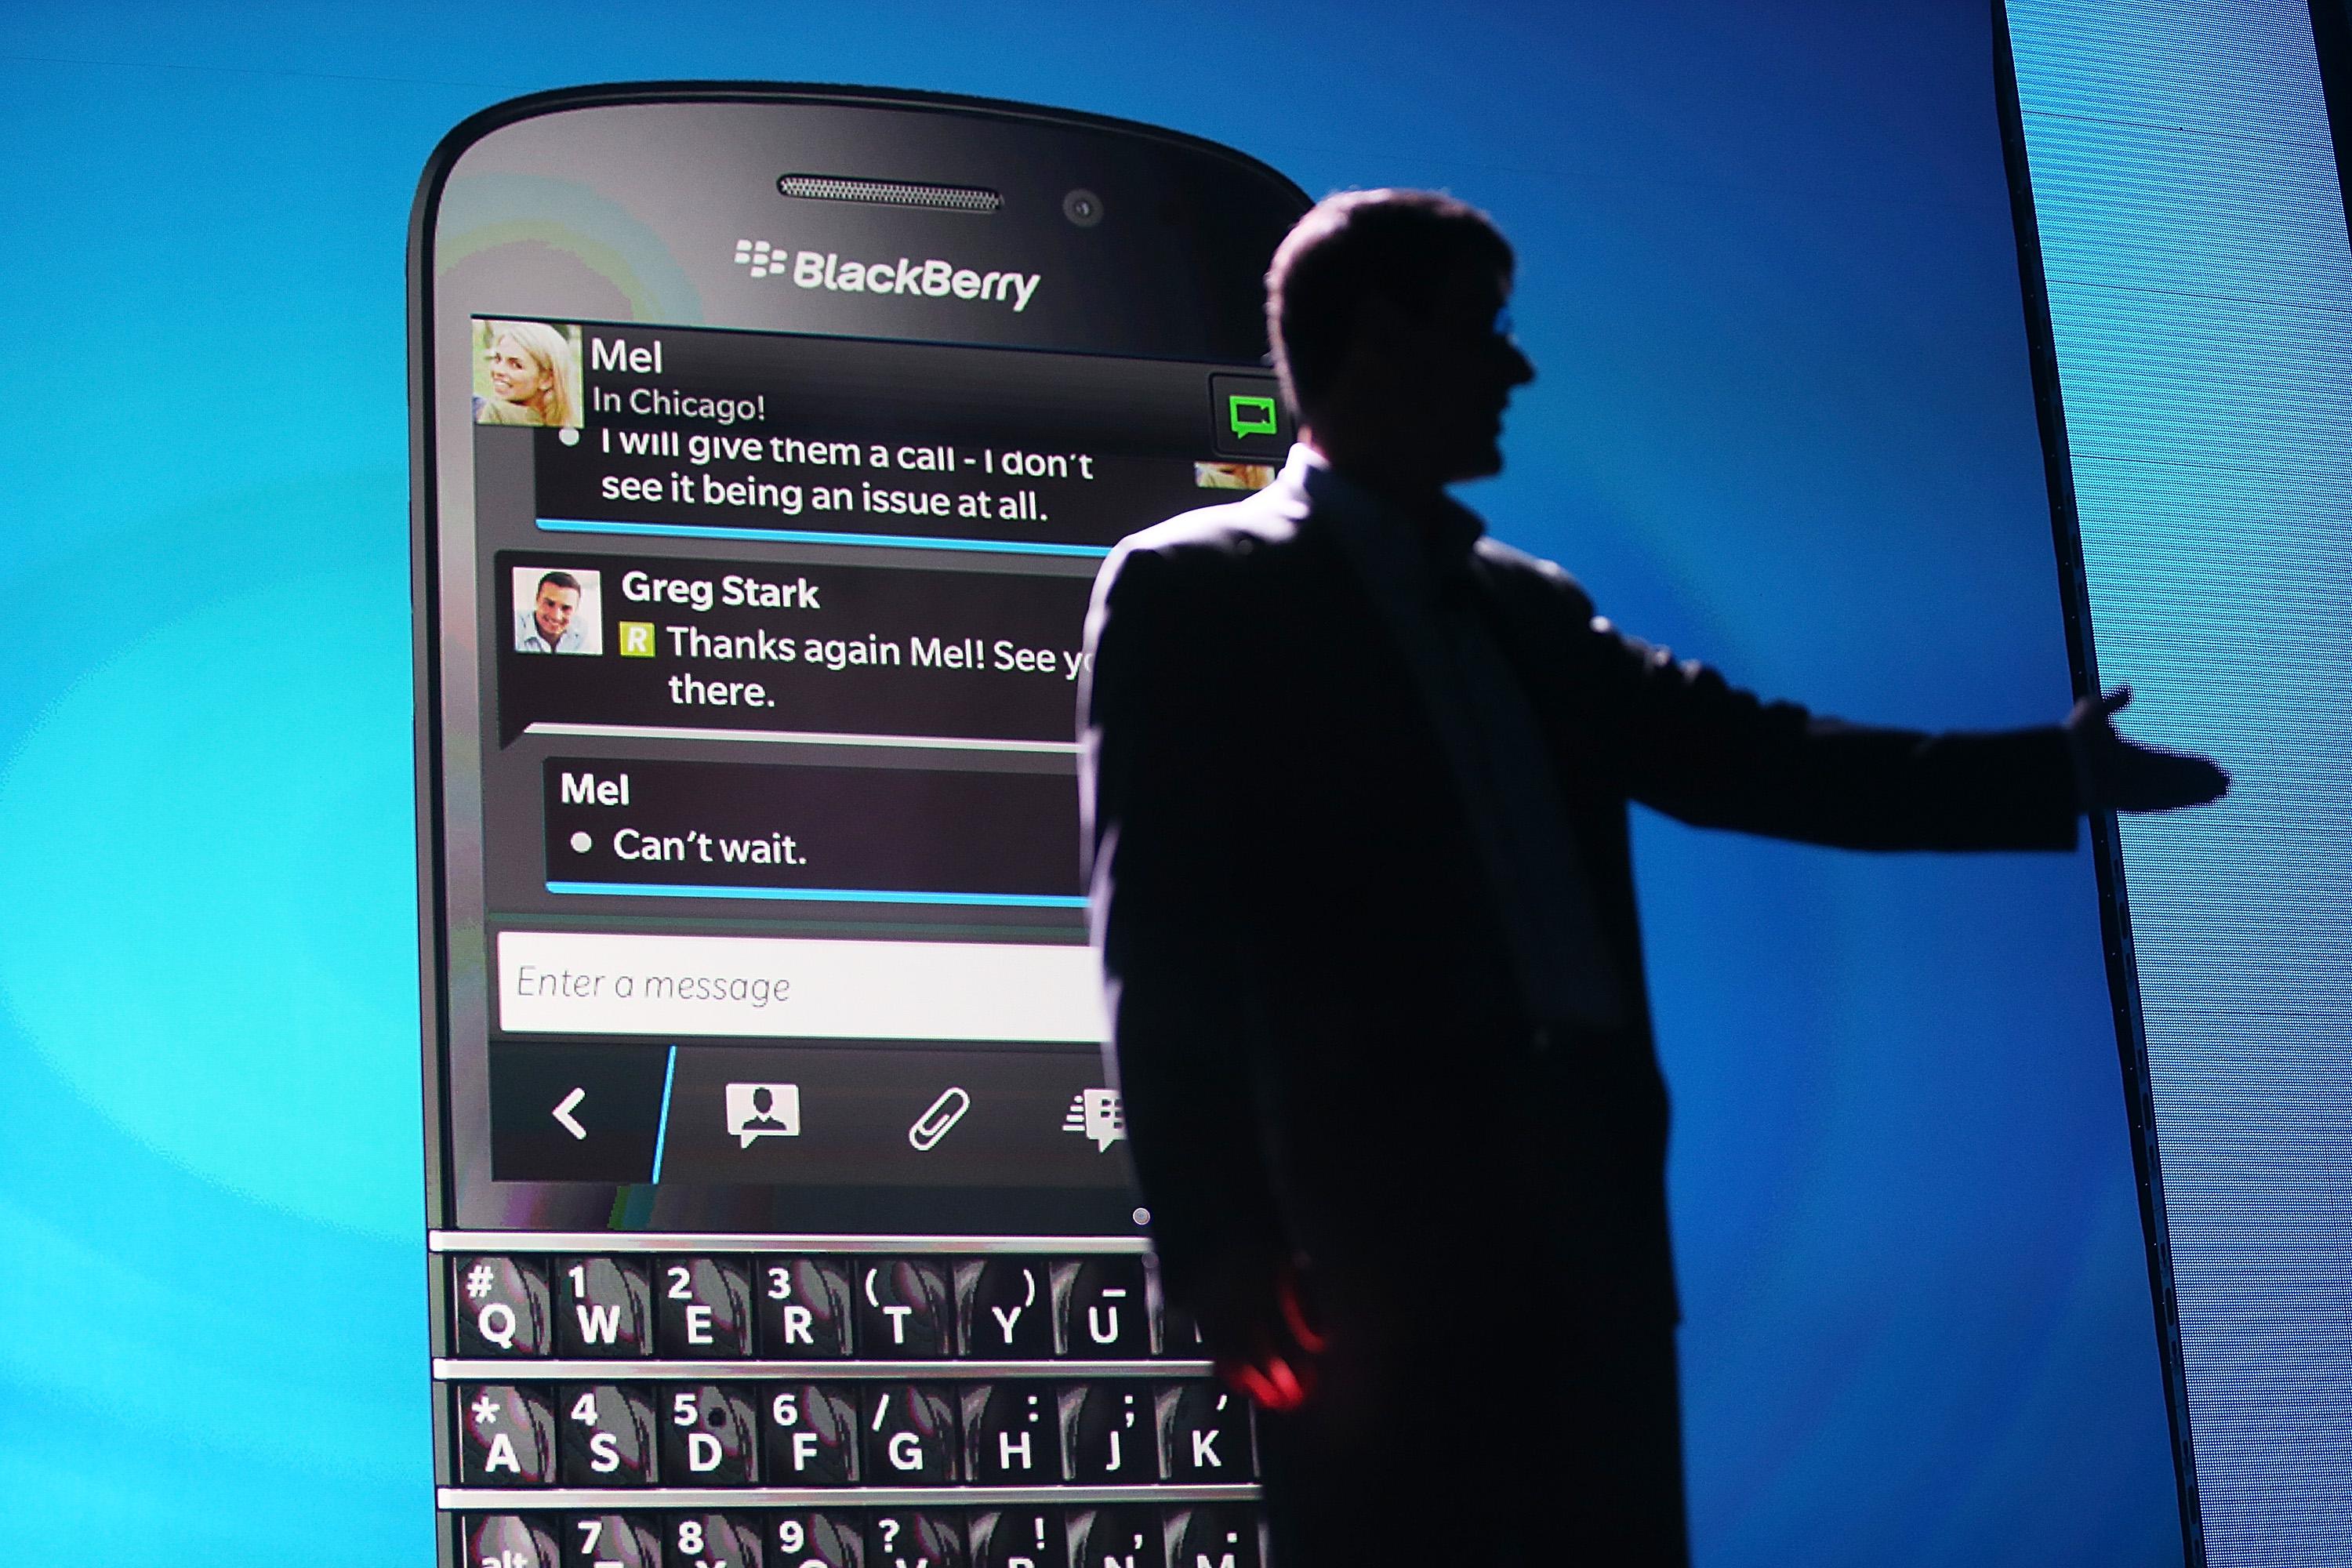 BlackBerry Chief Executive Officer Thorsten Heins speaks in front of a display of one of the new Blackberry 10 smartphones at the BlackBerry 10 launch event by Research in Motion on Jan. 30 in New York City.